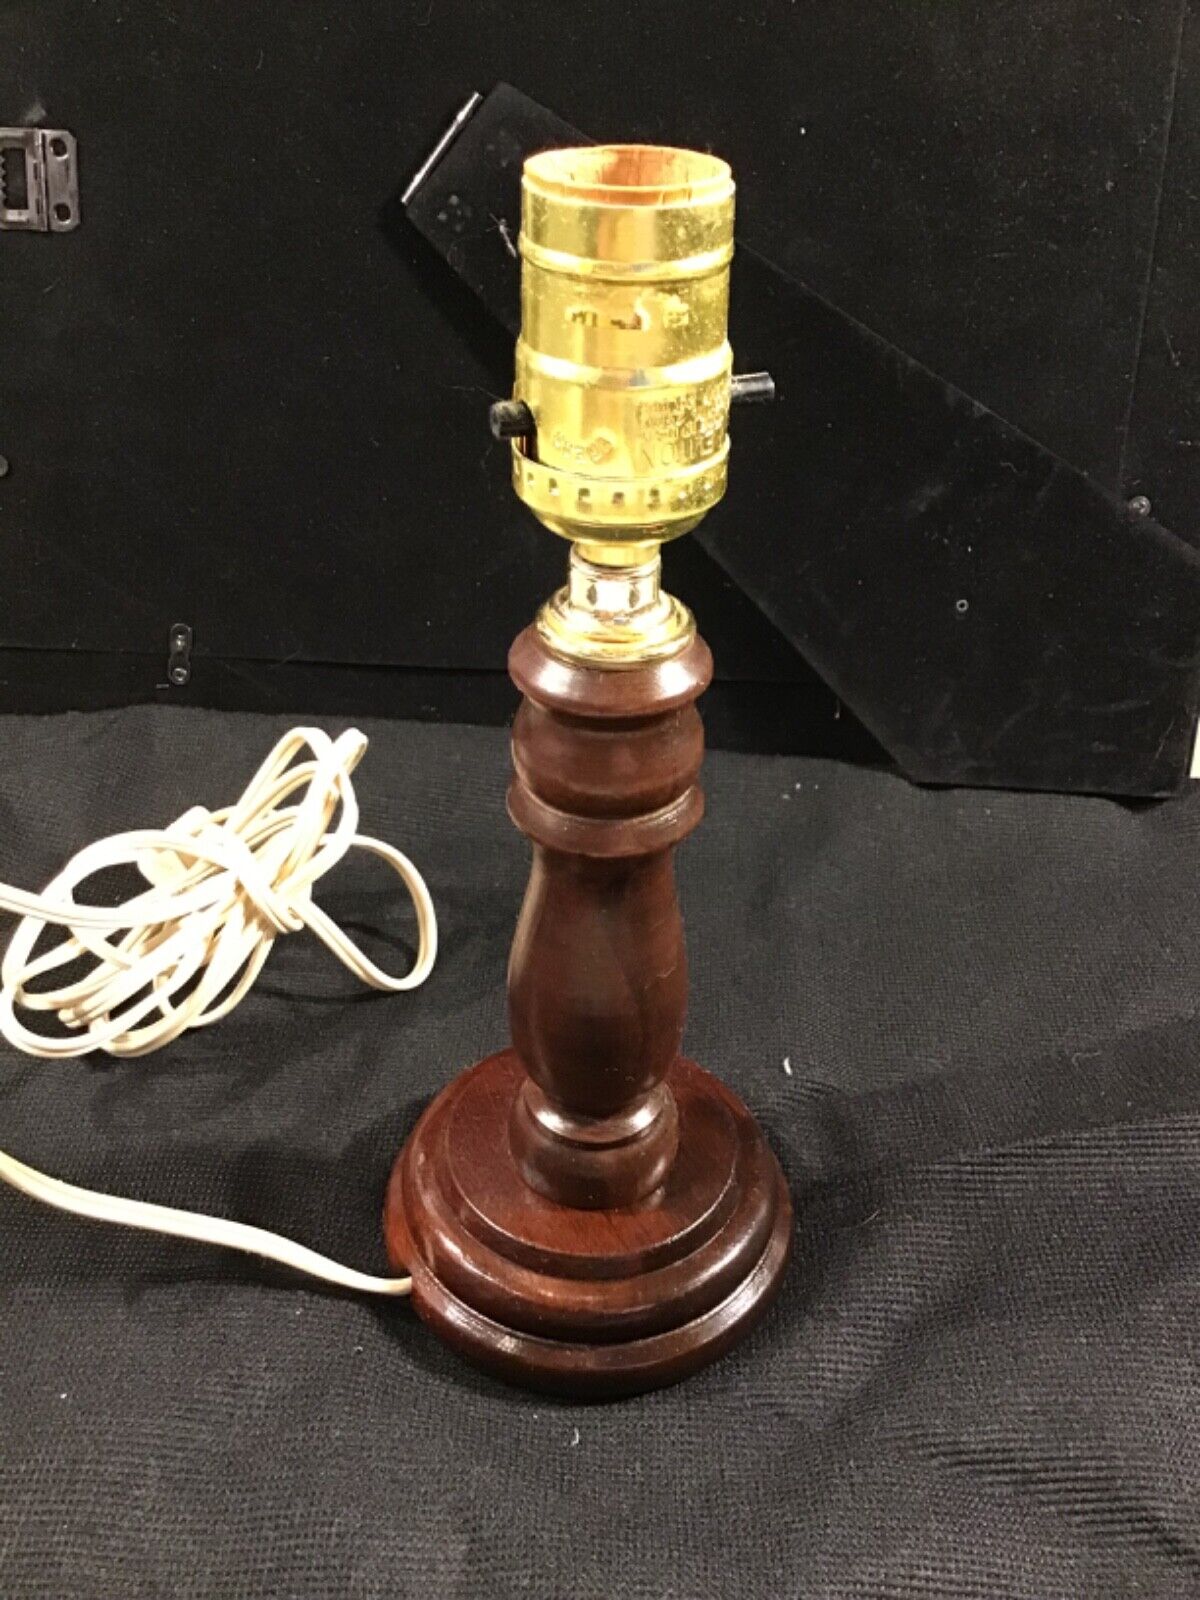 Brown Wood Table Lamp 9” Very Basic in Very Good Condition Tested